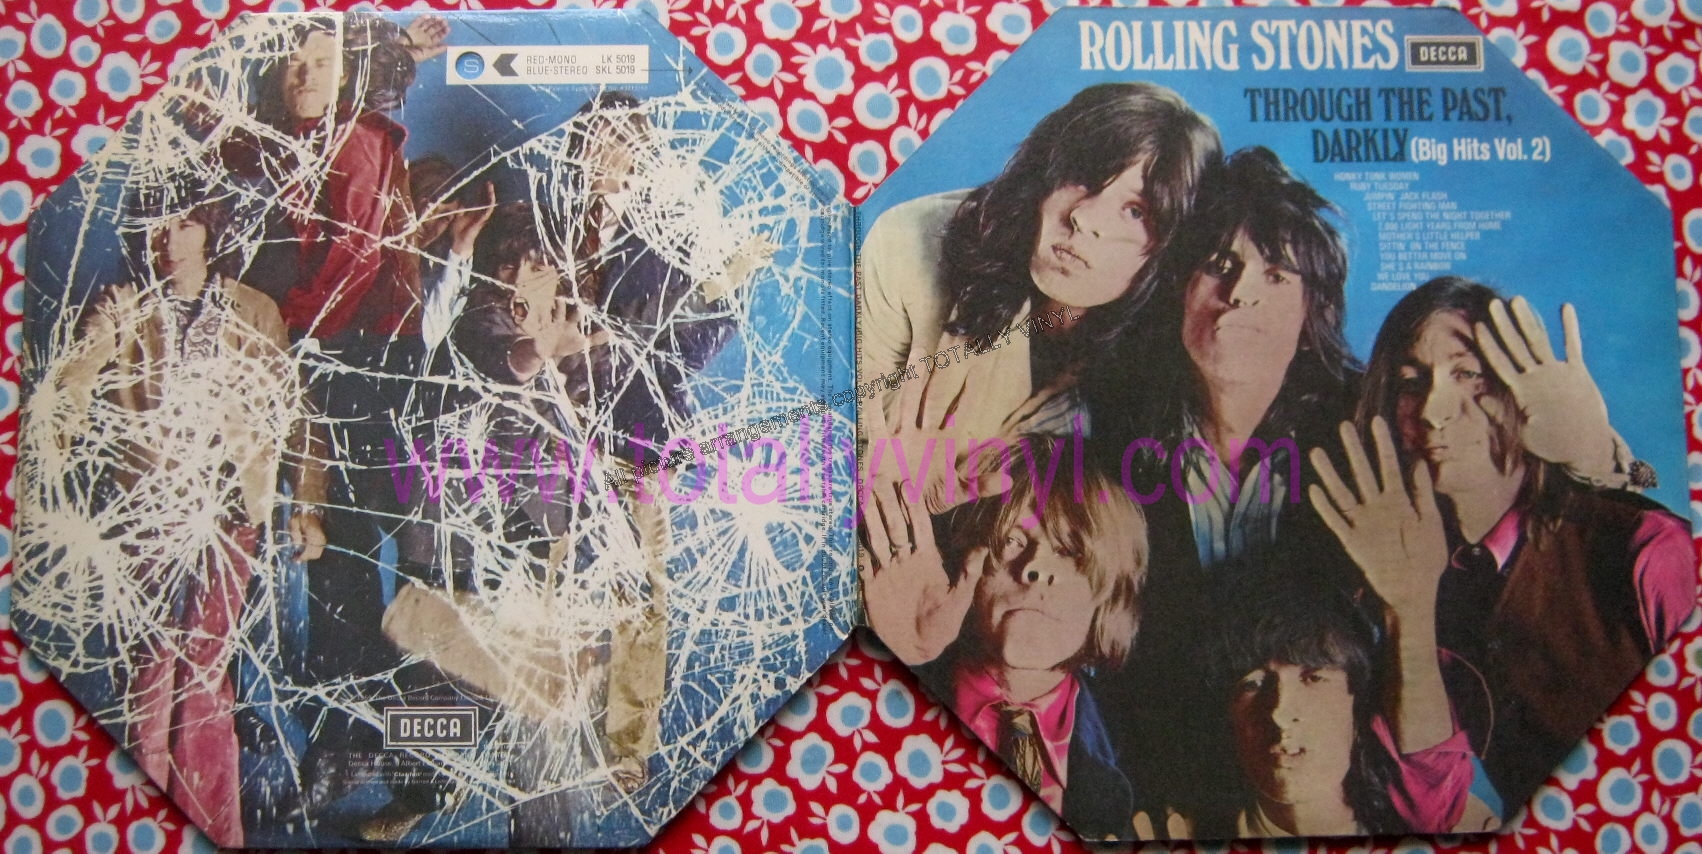 Rolling stones anybody seen. Through the past, Darkly the Rolling Stones. Rolling Stones through the past Darkly big Hits Vol 2. Through the past, Darkly (big Hits Vol. 2). Big Hits the Rolling Stones.